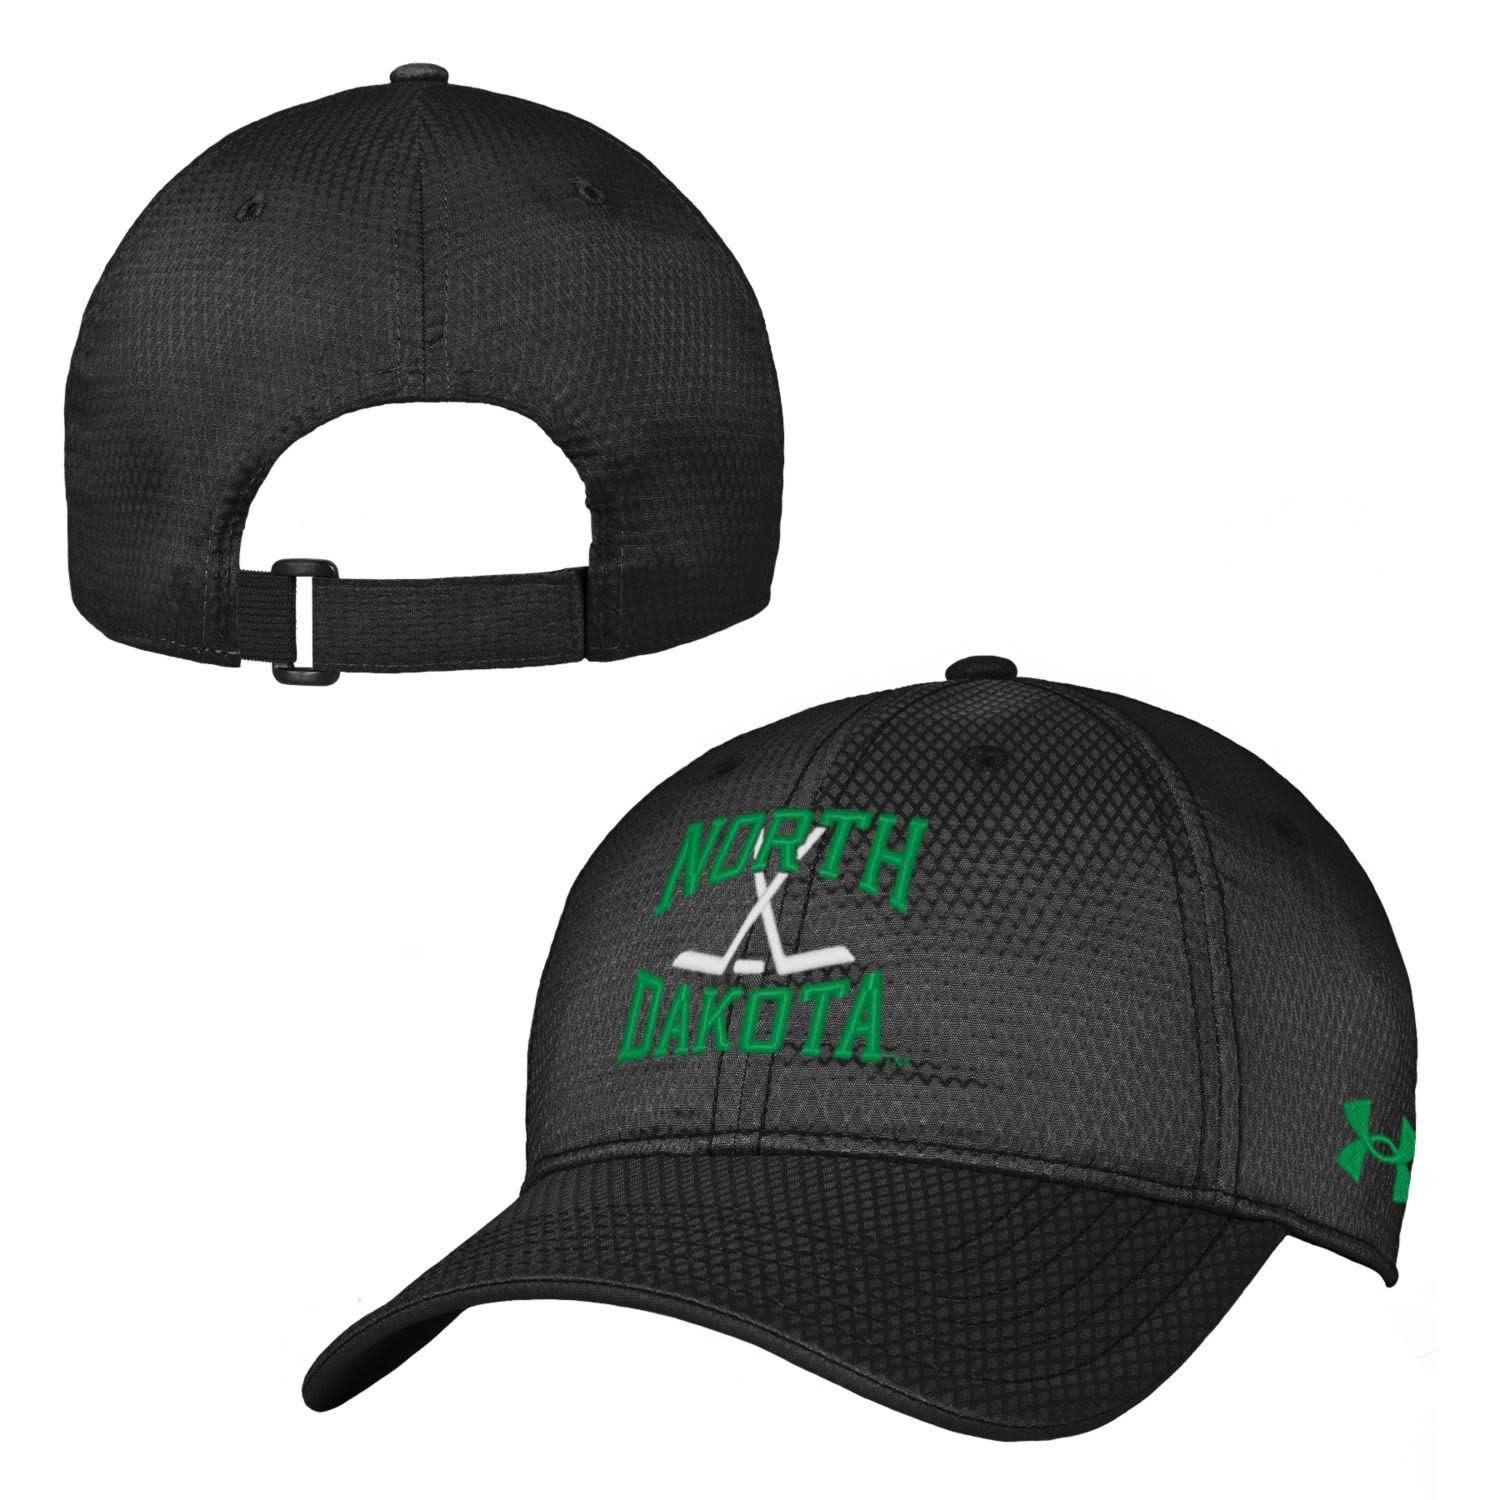 Under Armour ND Hockey Zone Hat - Black - Sioux Shop at Ralph